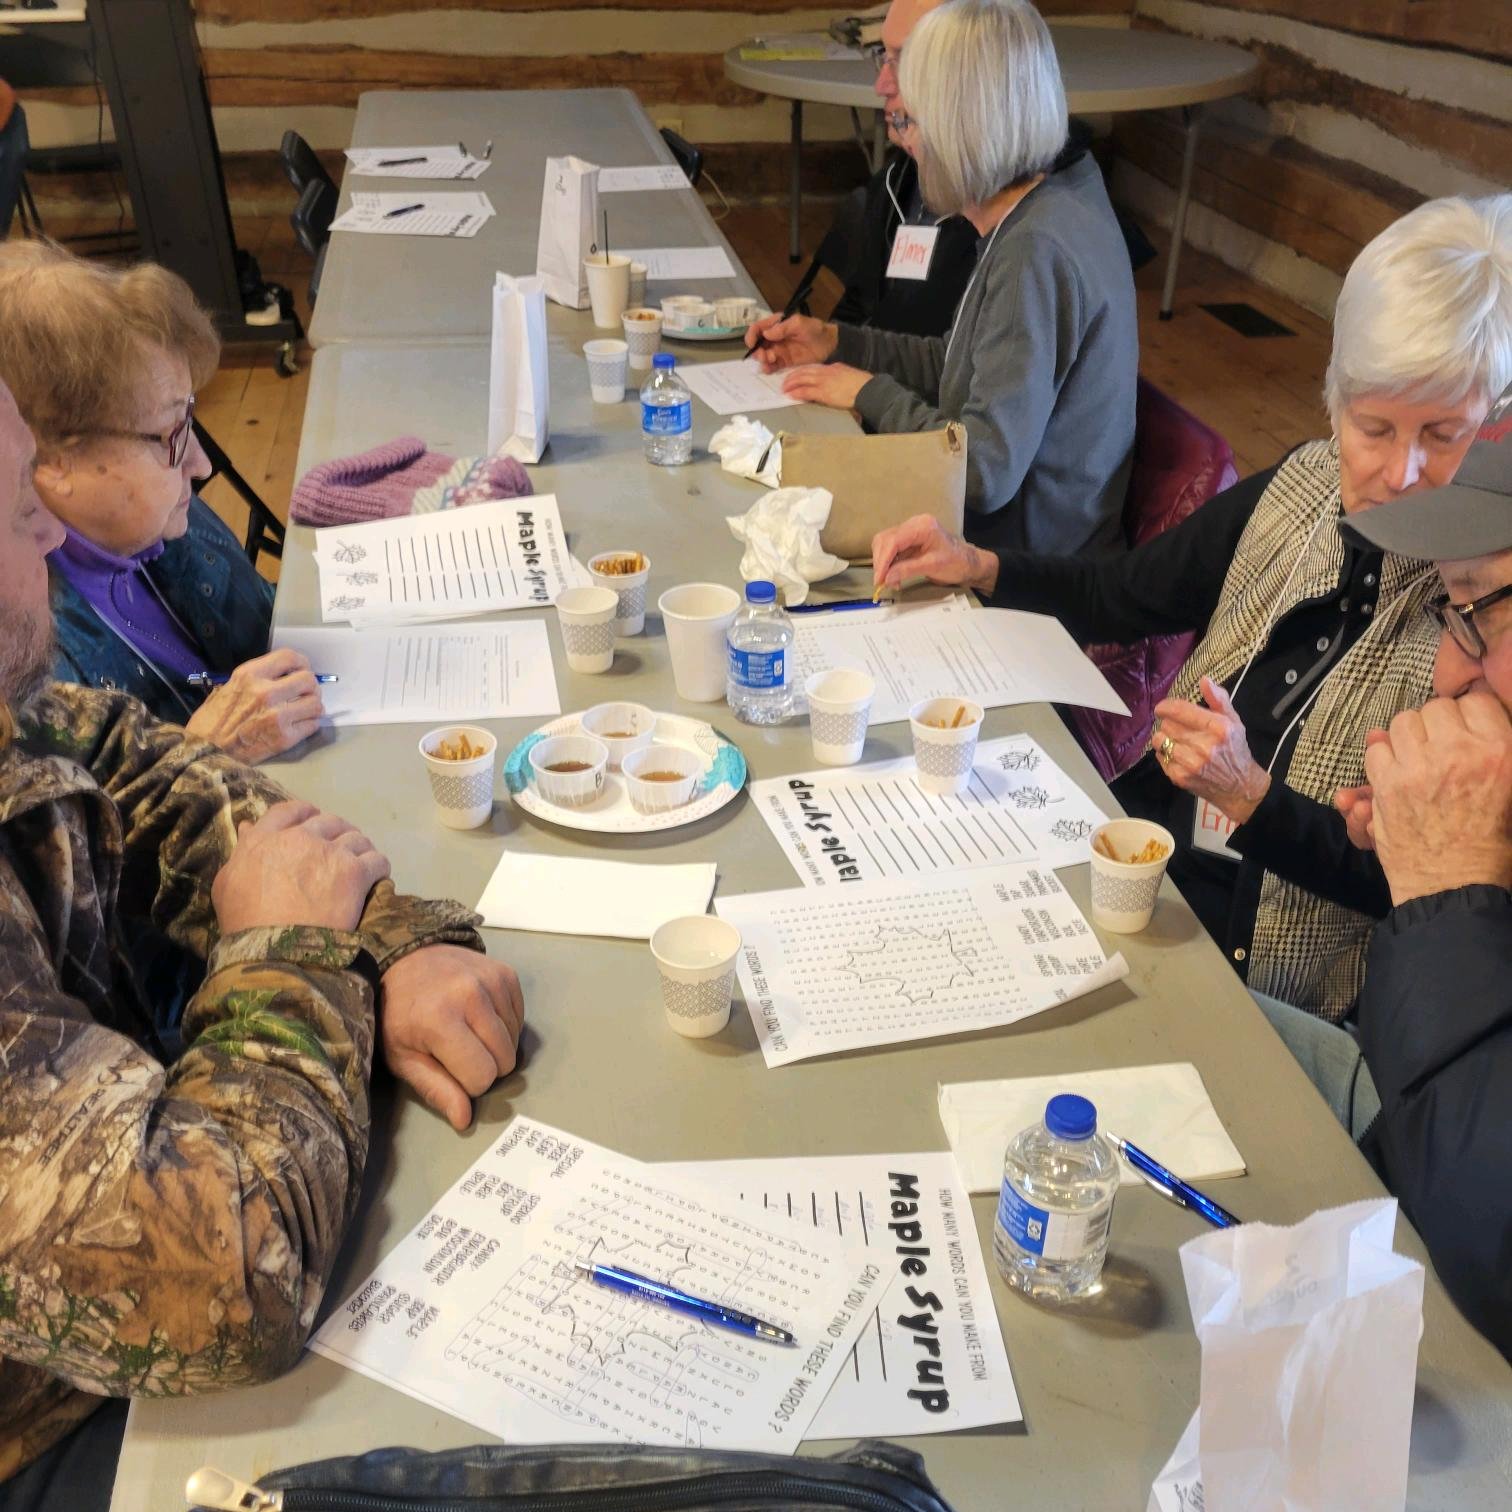 6 older adults sit at a table in the Riveredge barn sampling different types of maple syrup